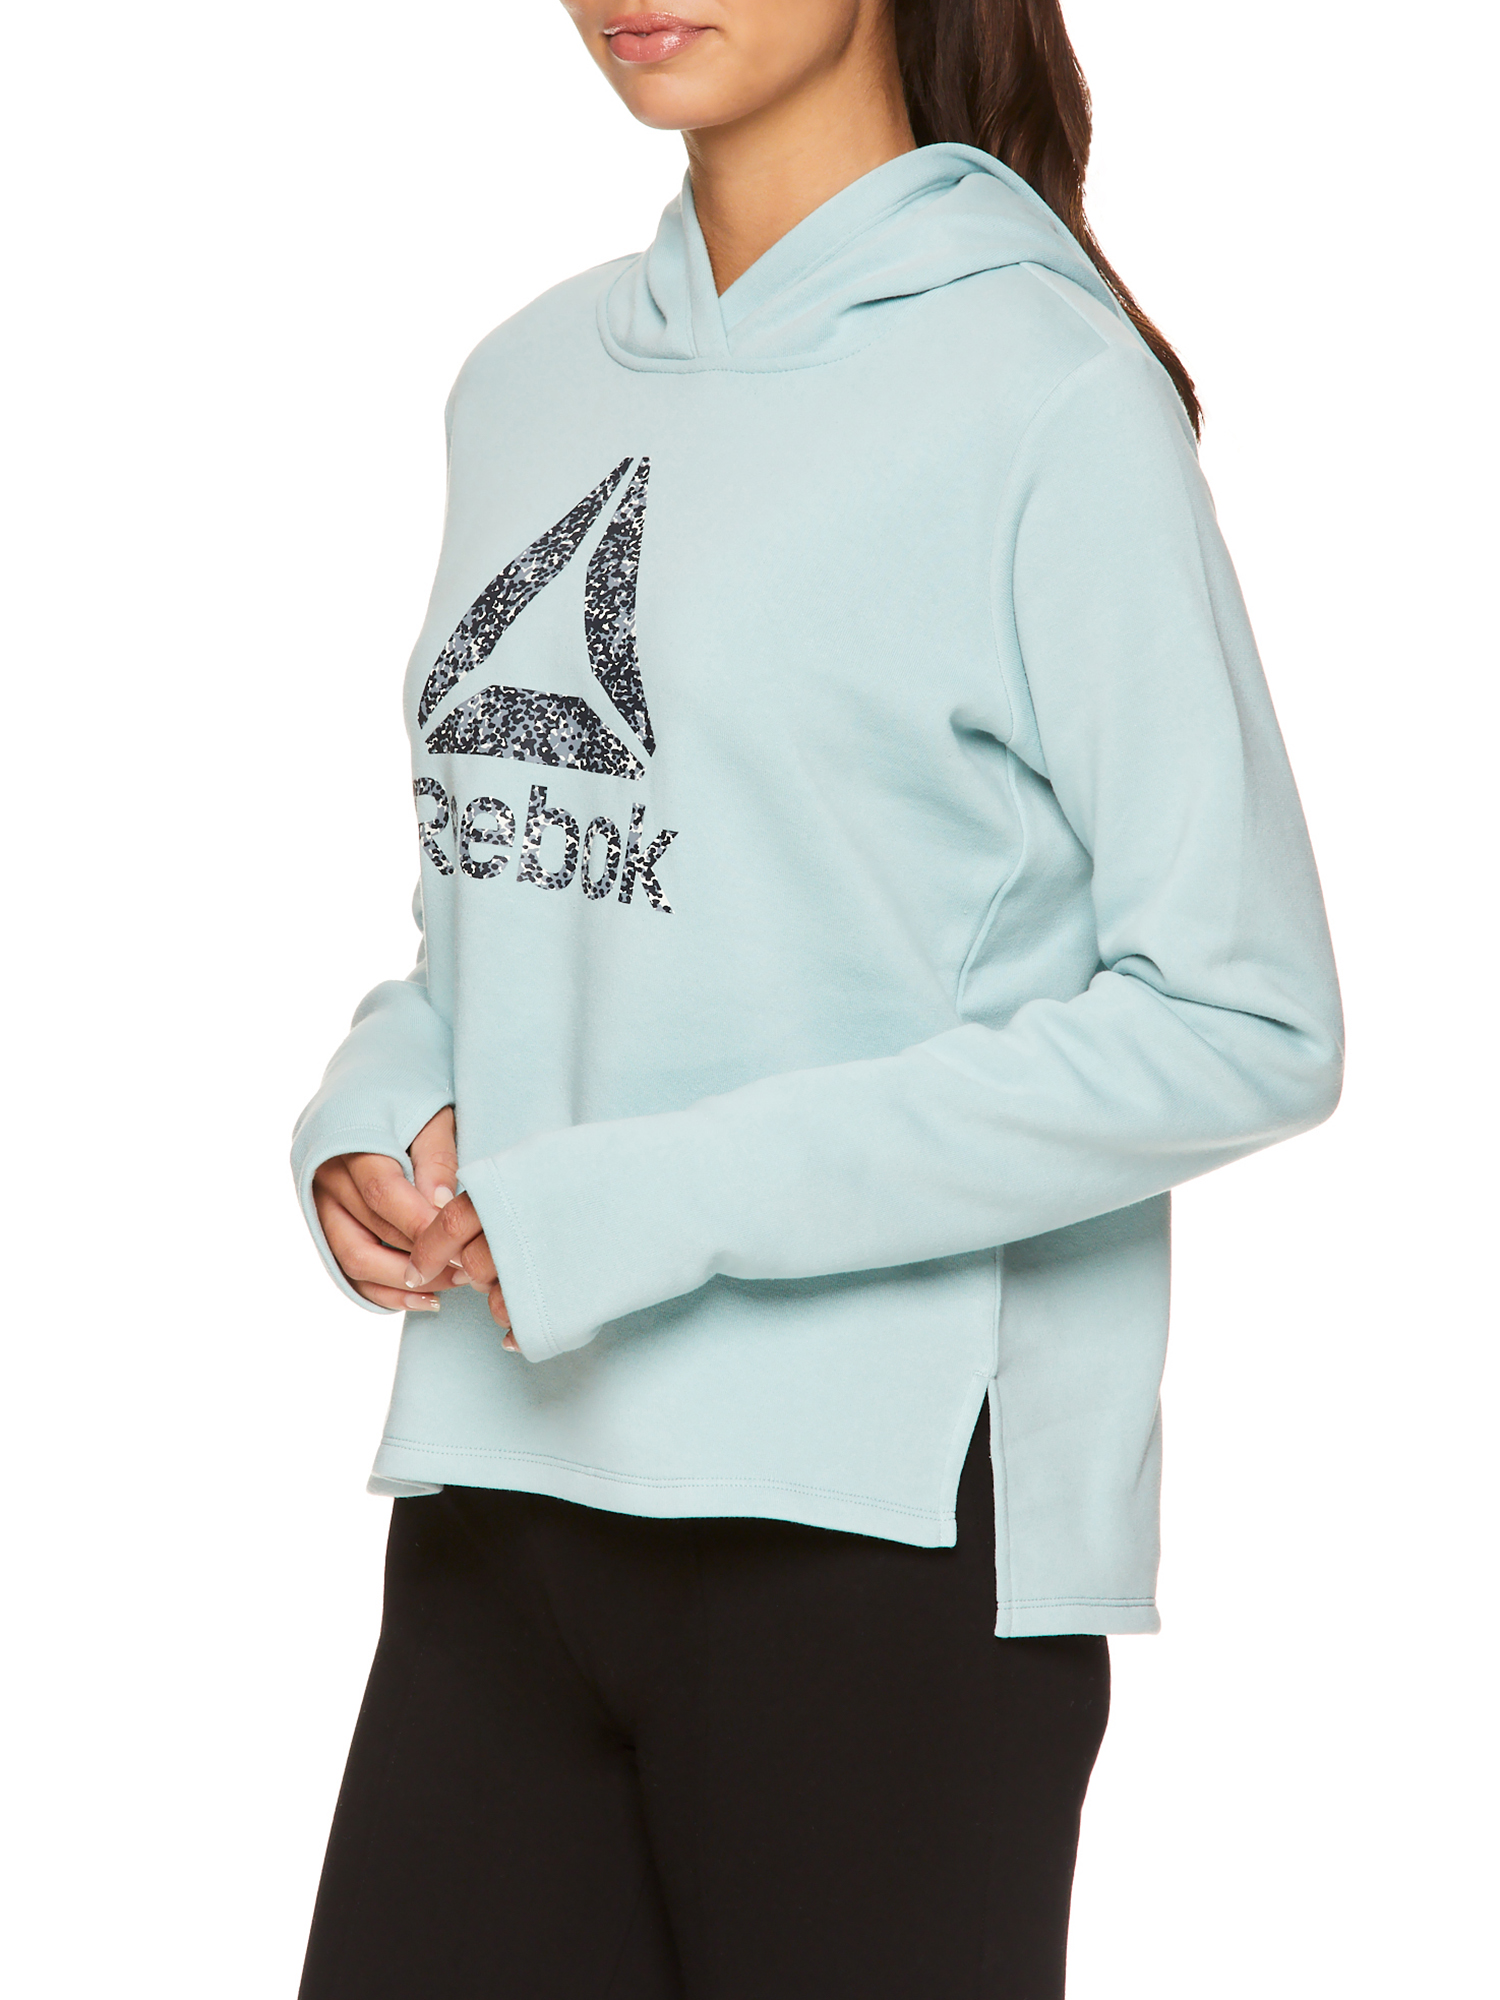 Reebok Womens Side Slit Hoodie with Graphic - image 3 of 4